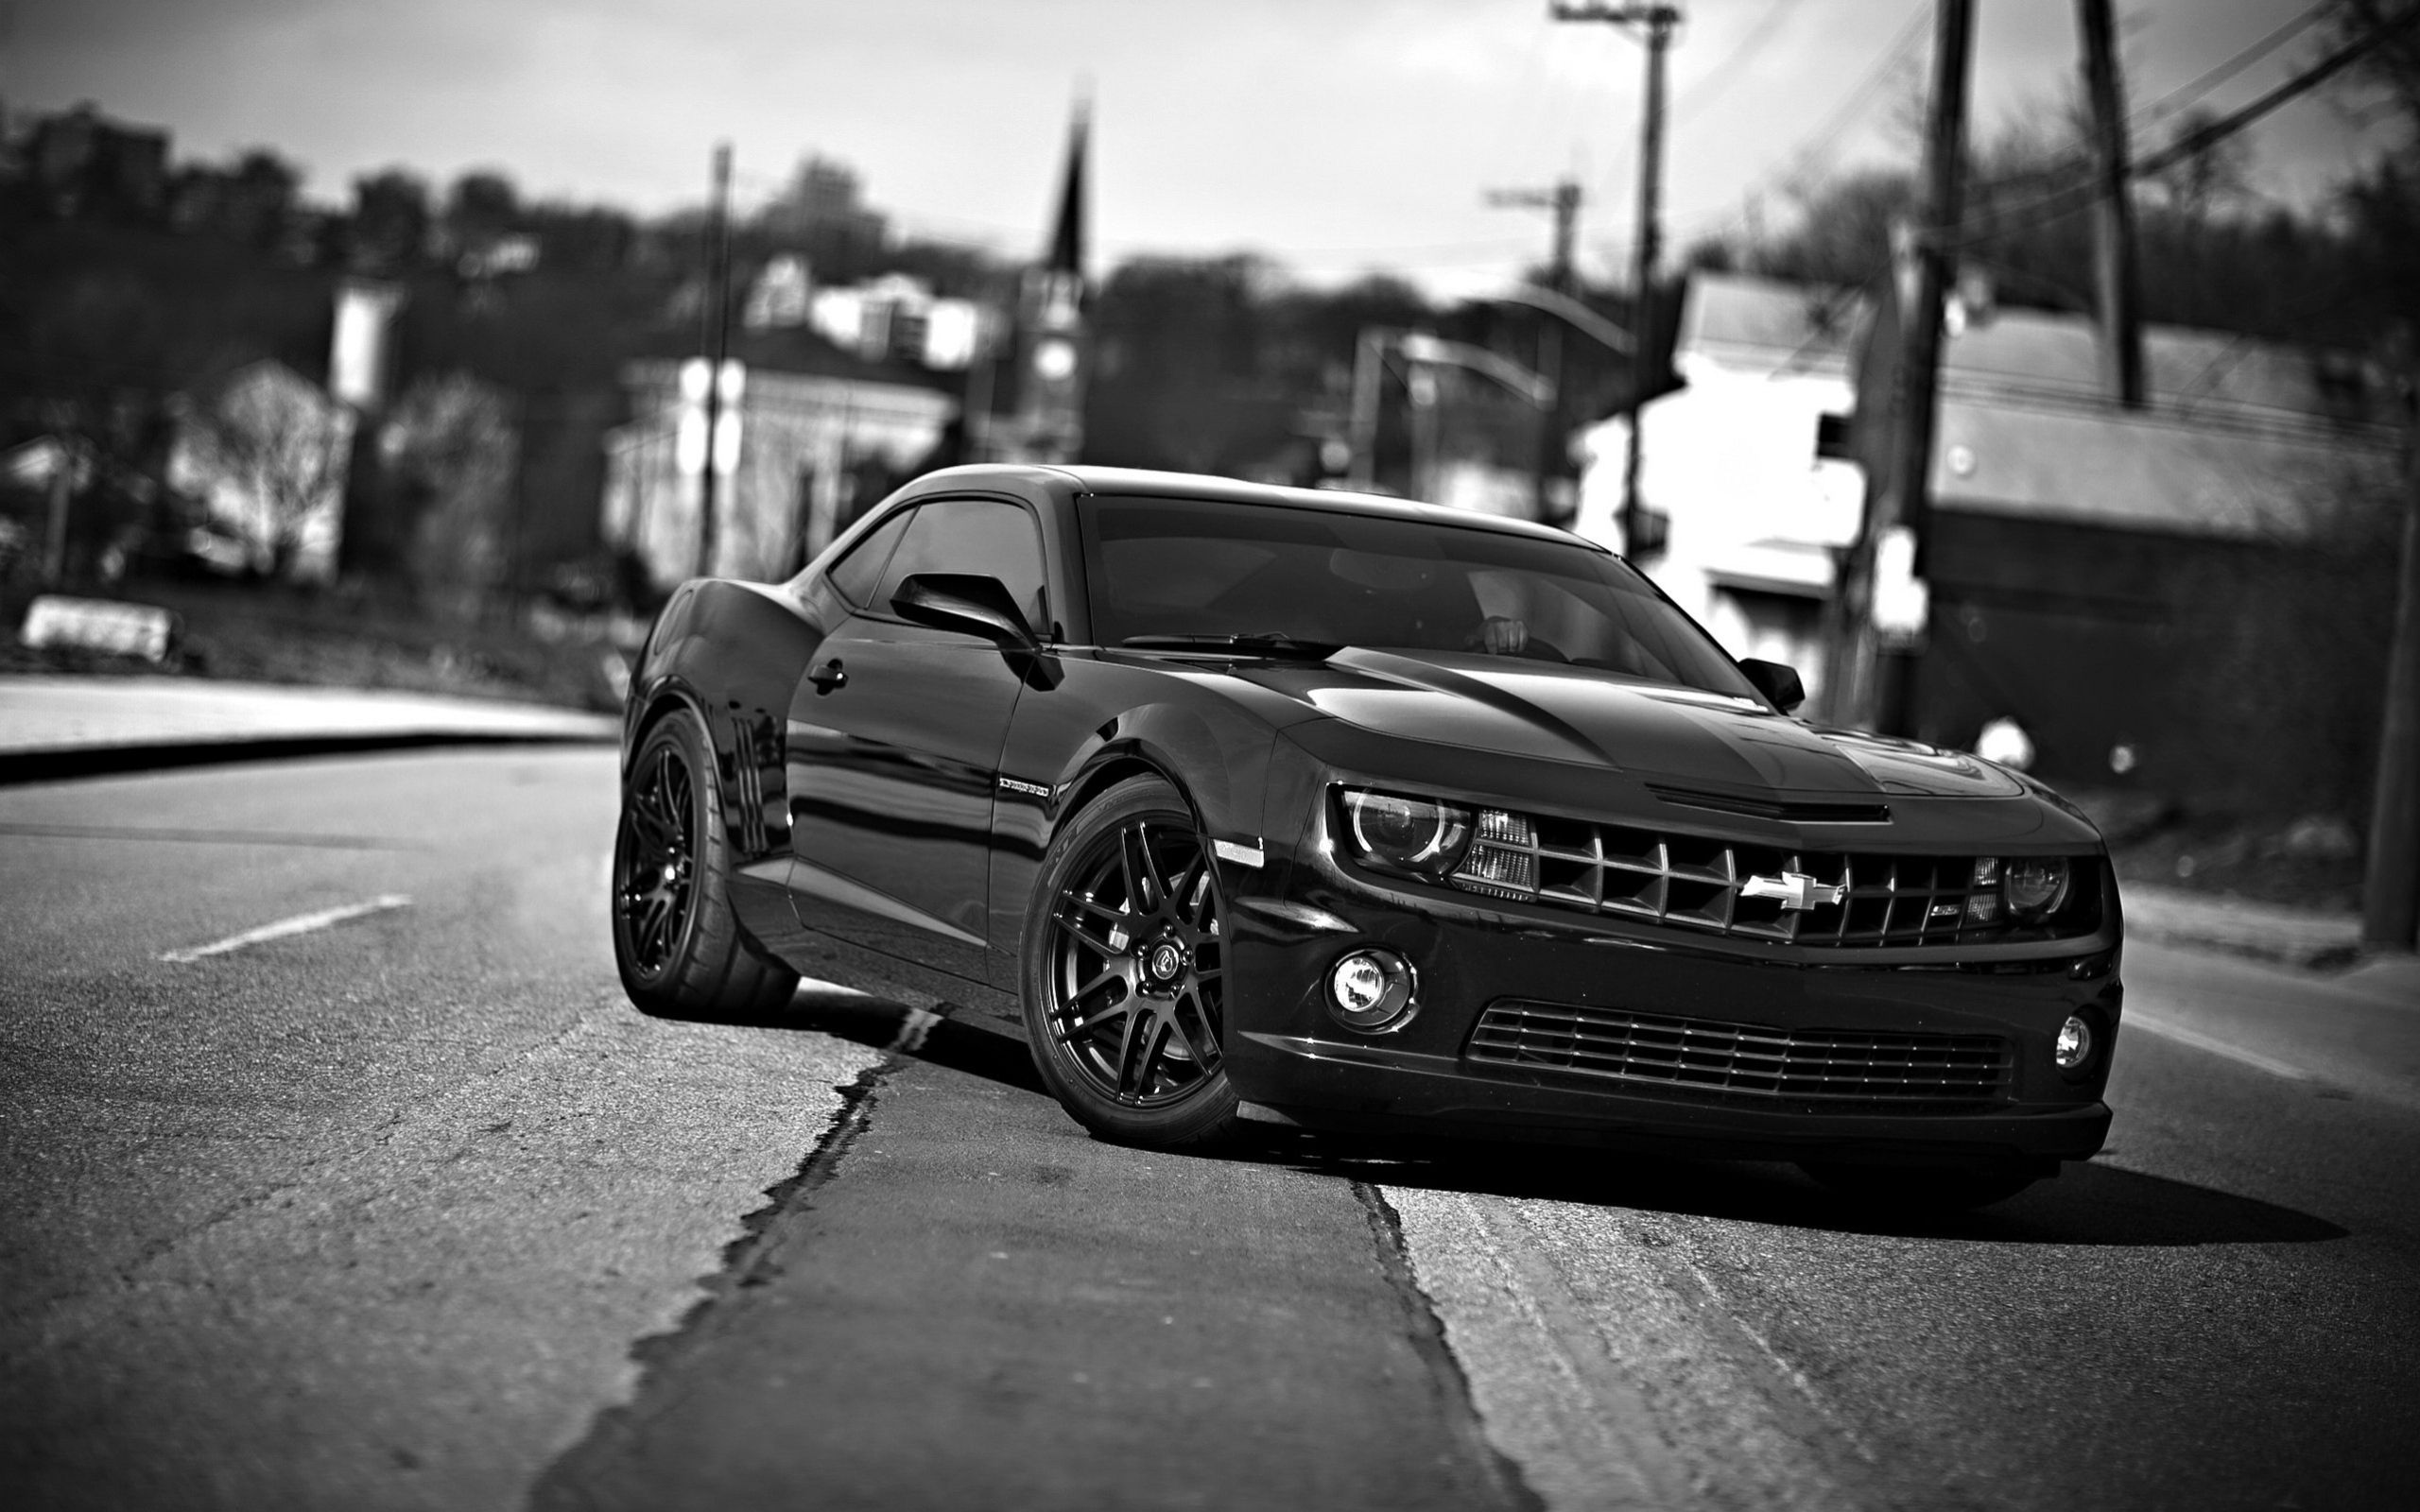 auto, front view, chevrolet camaro, cars, chb, chevrolet, bw cellphone